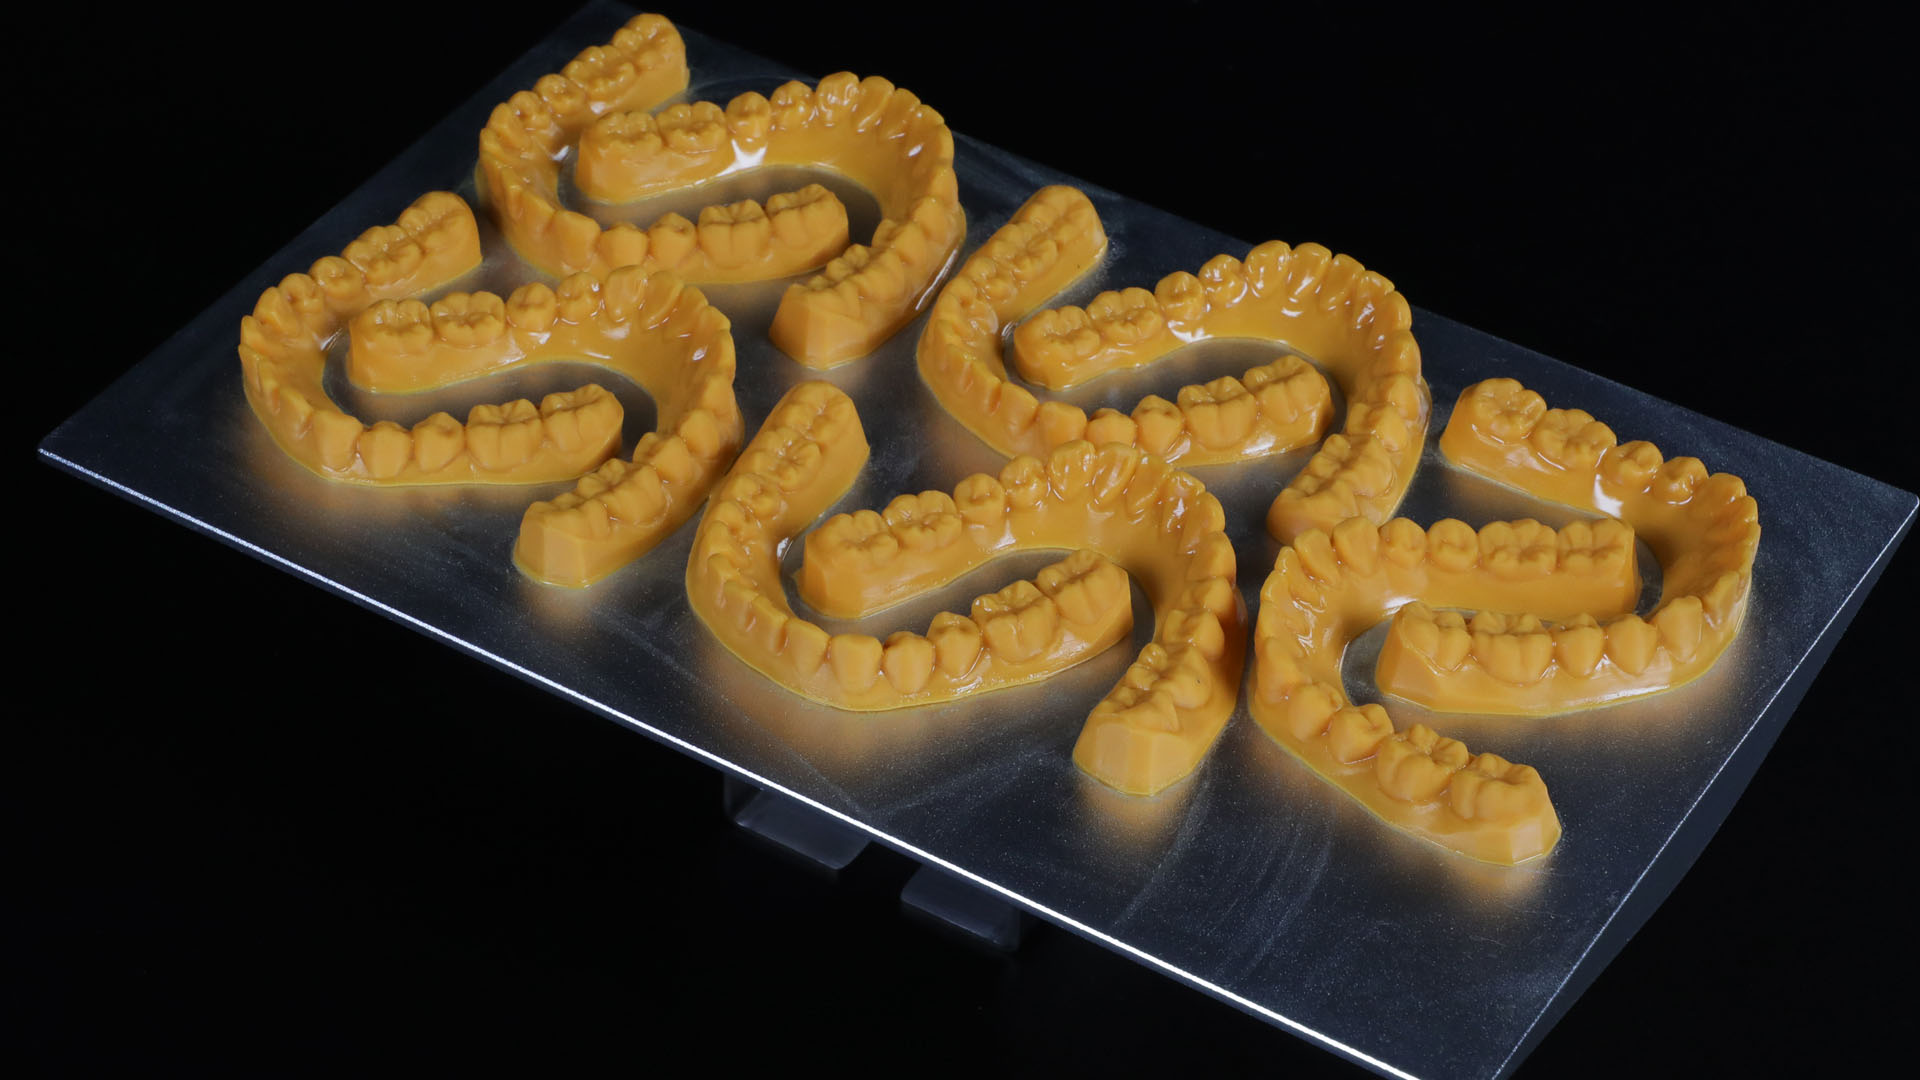 What Is a 3D printed Dental Model, And How Does 3D Printing Make a Dental Model?